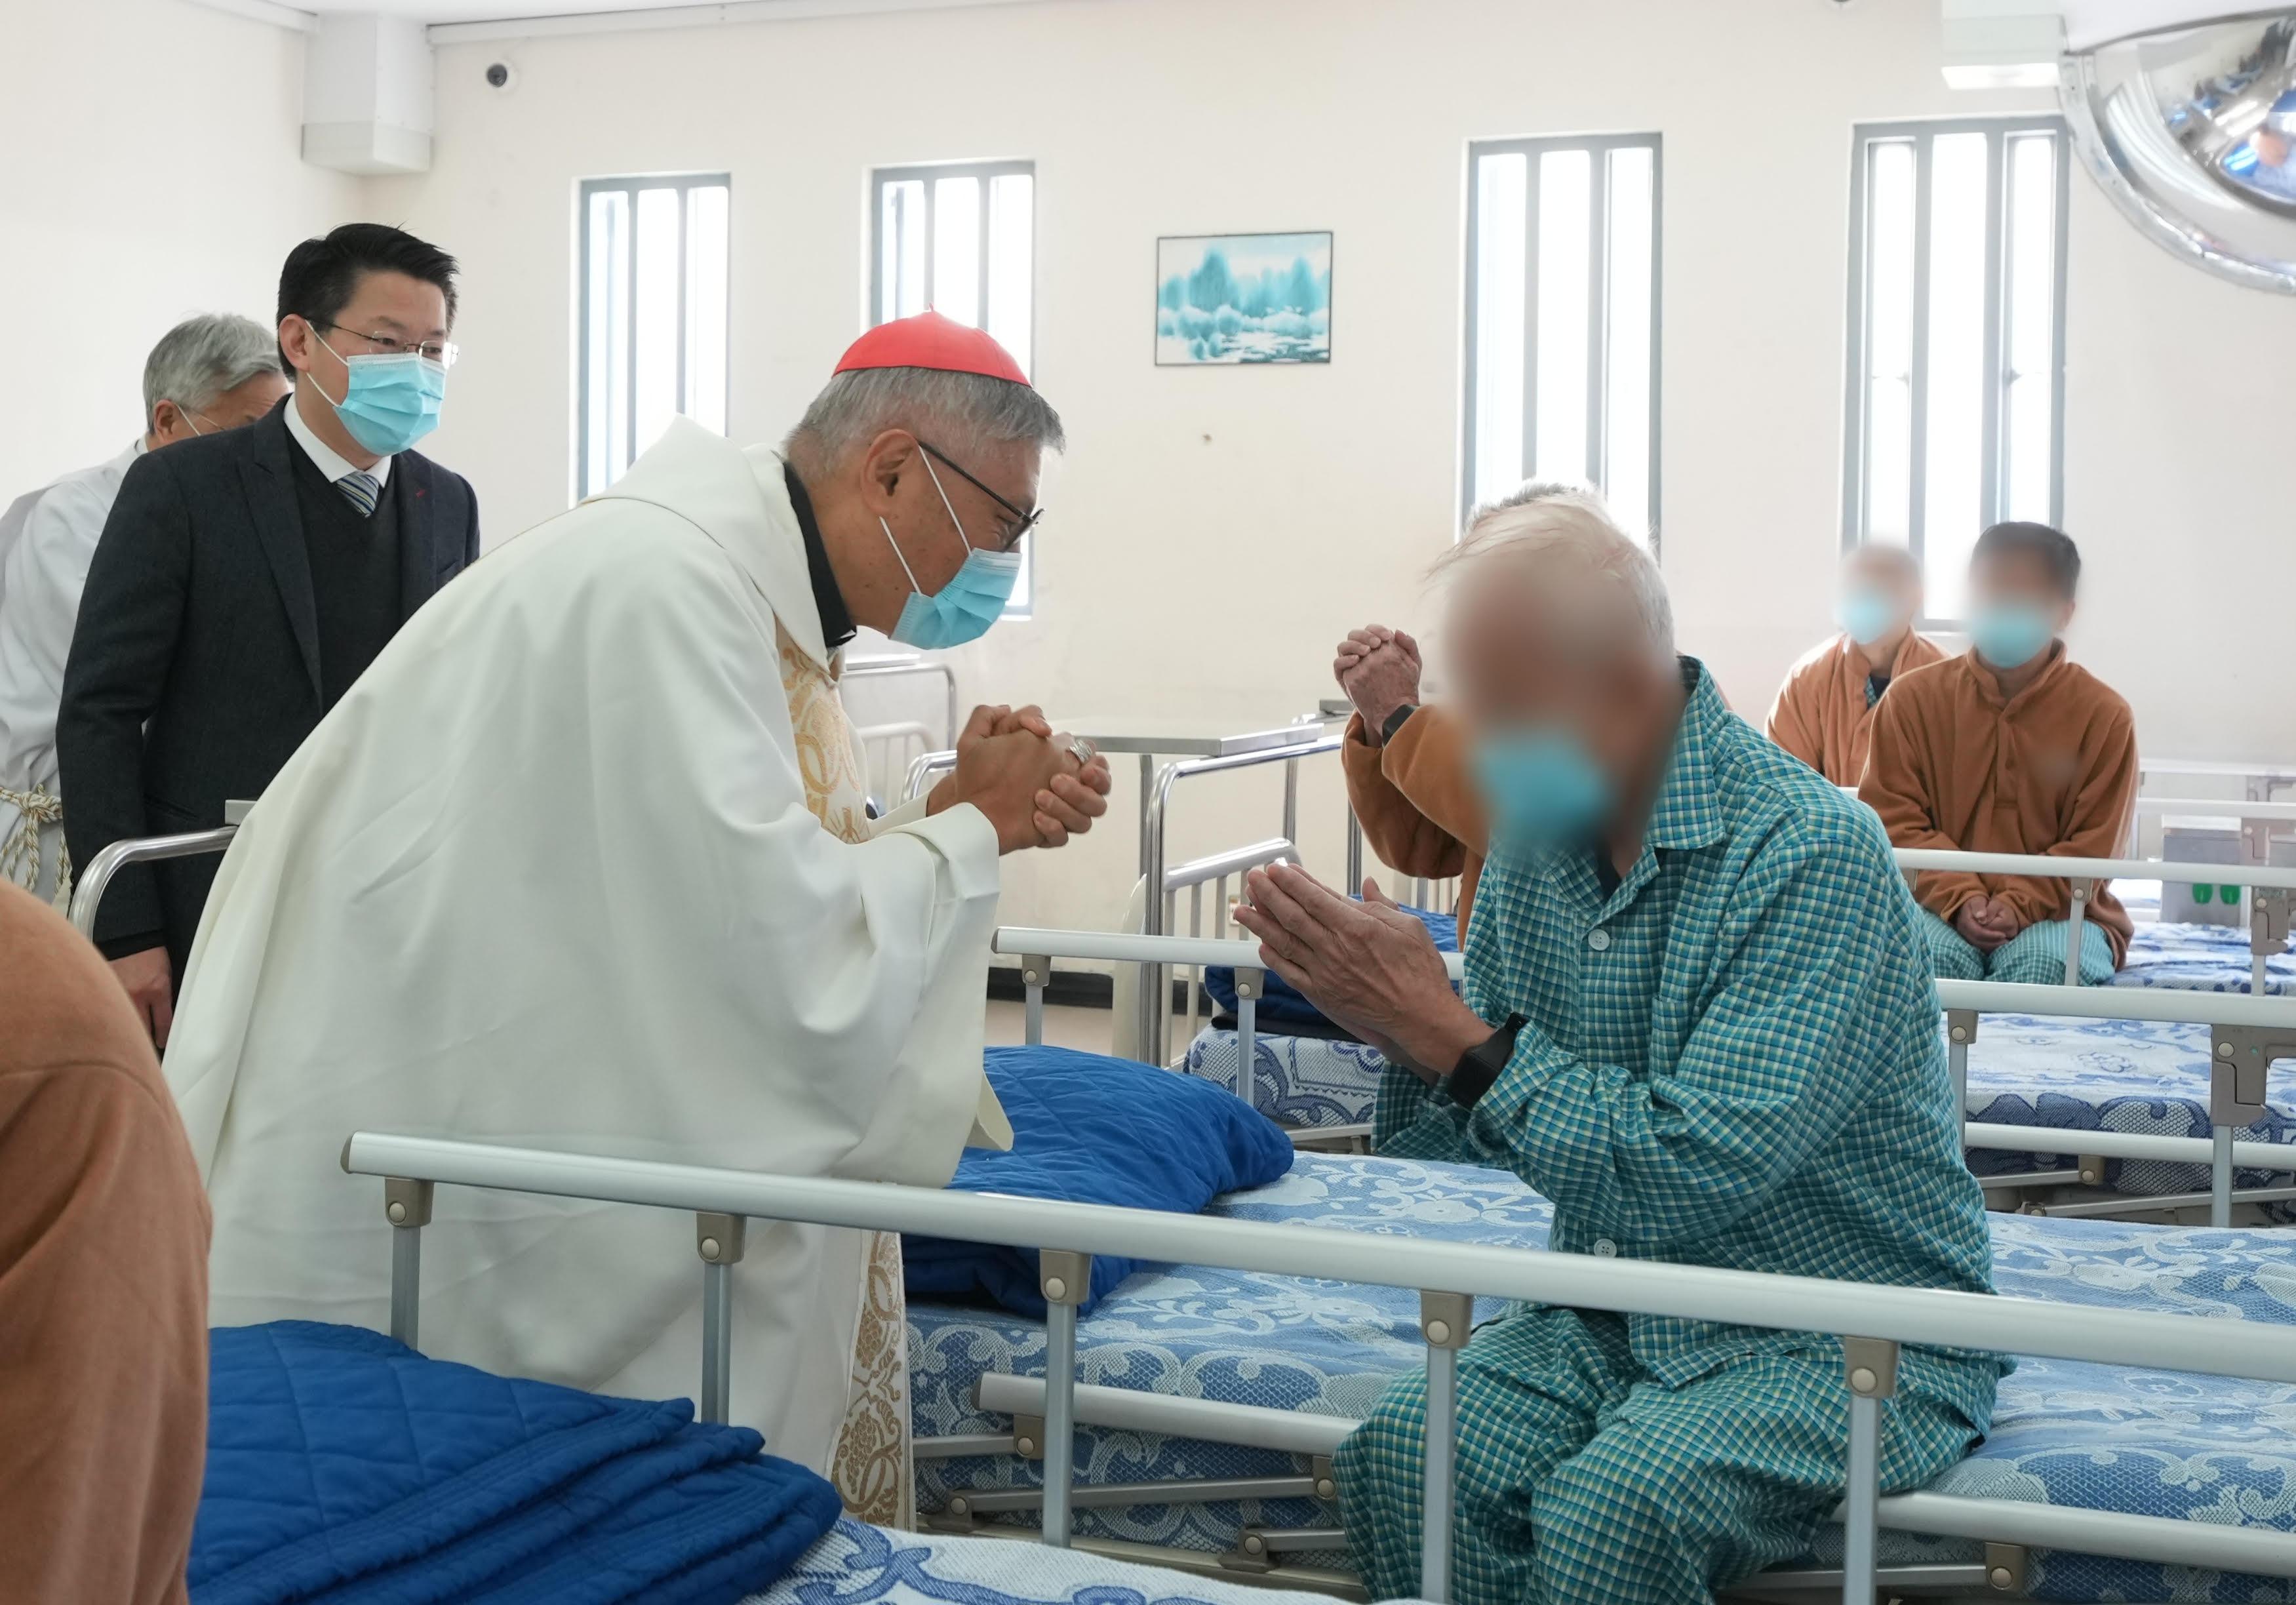 The Bishop of the Catholic Diocese of Hong Kong, Cardinal Stephen Chow (second left), accompanied by the Deputy Commissioner of Correctional Services (Operations and Strategic Development), Mr Ng Chiu-kok (first left), visited the hospital in Stanley Prison to convey his sympathy and support to the sick persons in custody today (December 25).